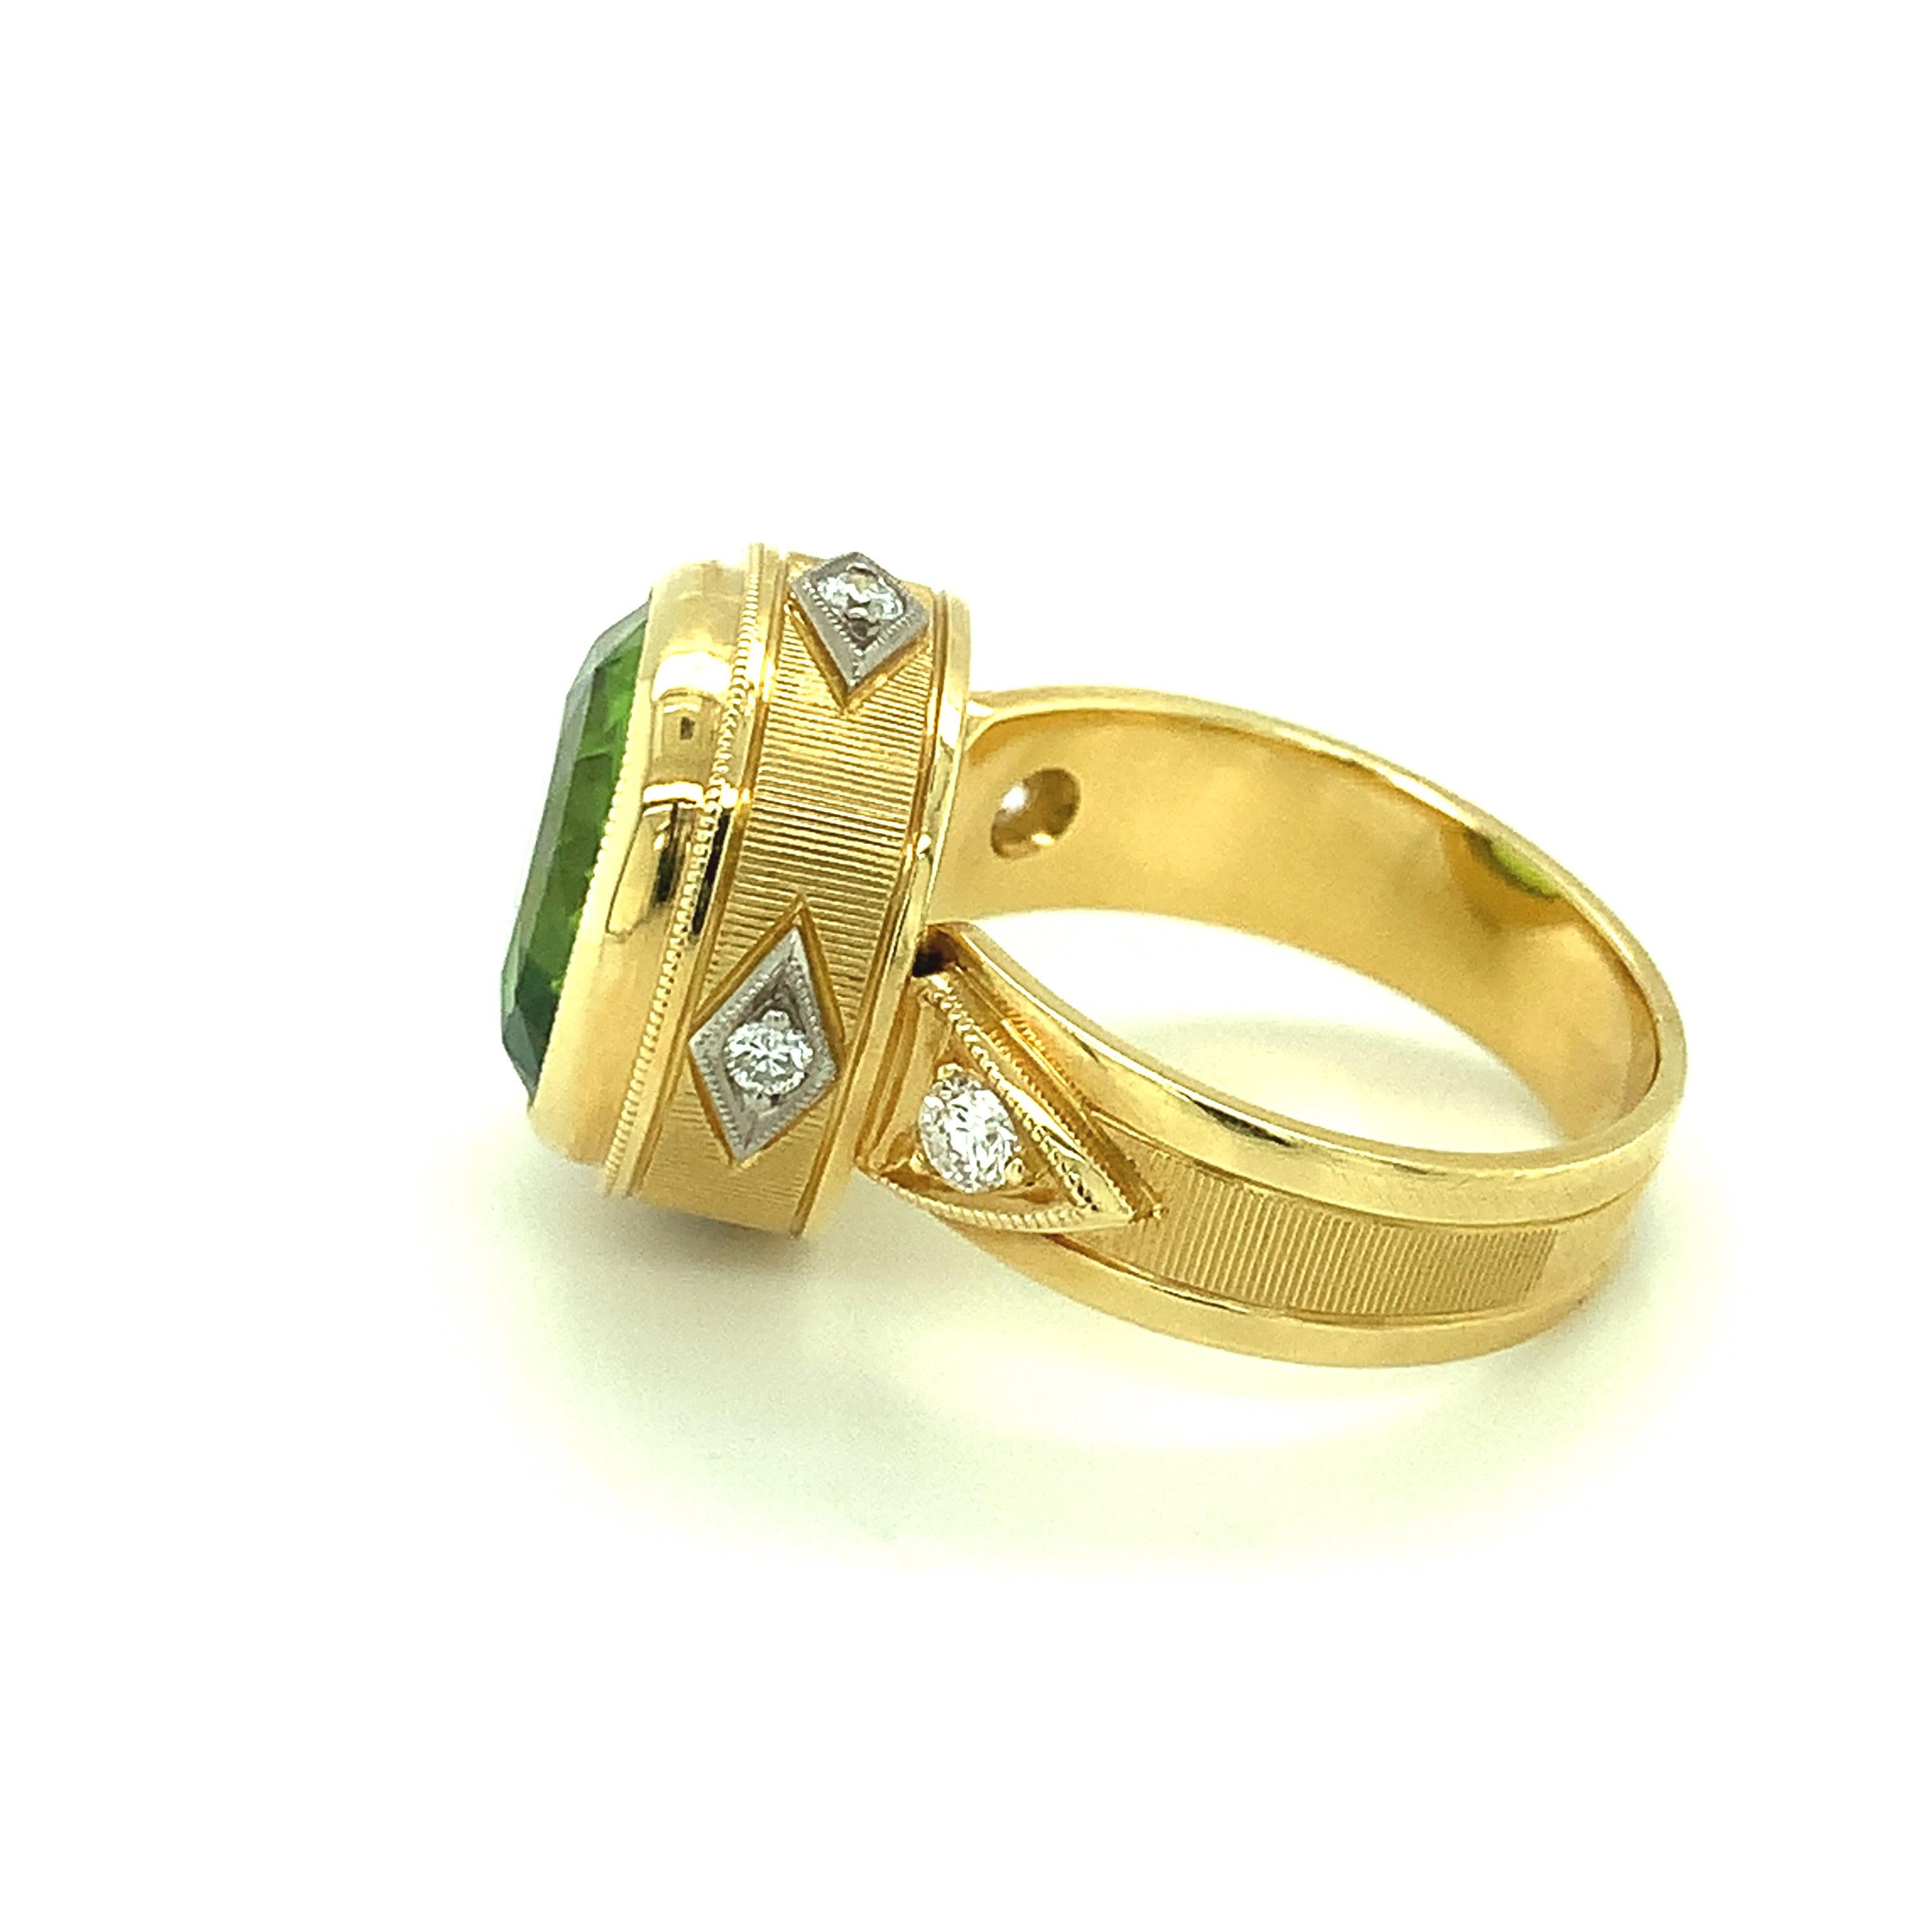 Cushion Cut 8.15 Carat Peridot Cushion and Diamond, Yellow and White Gold Bezel Ring   For Sale